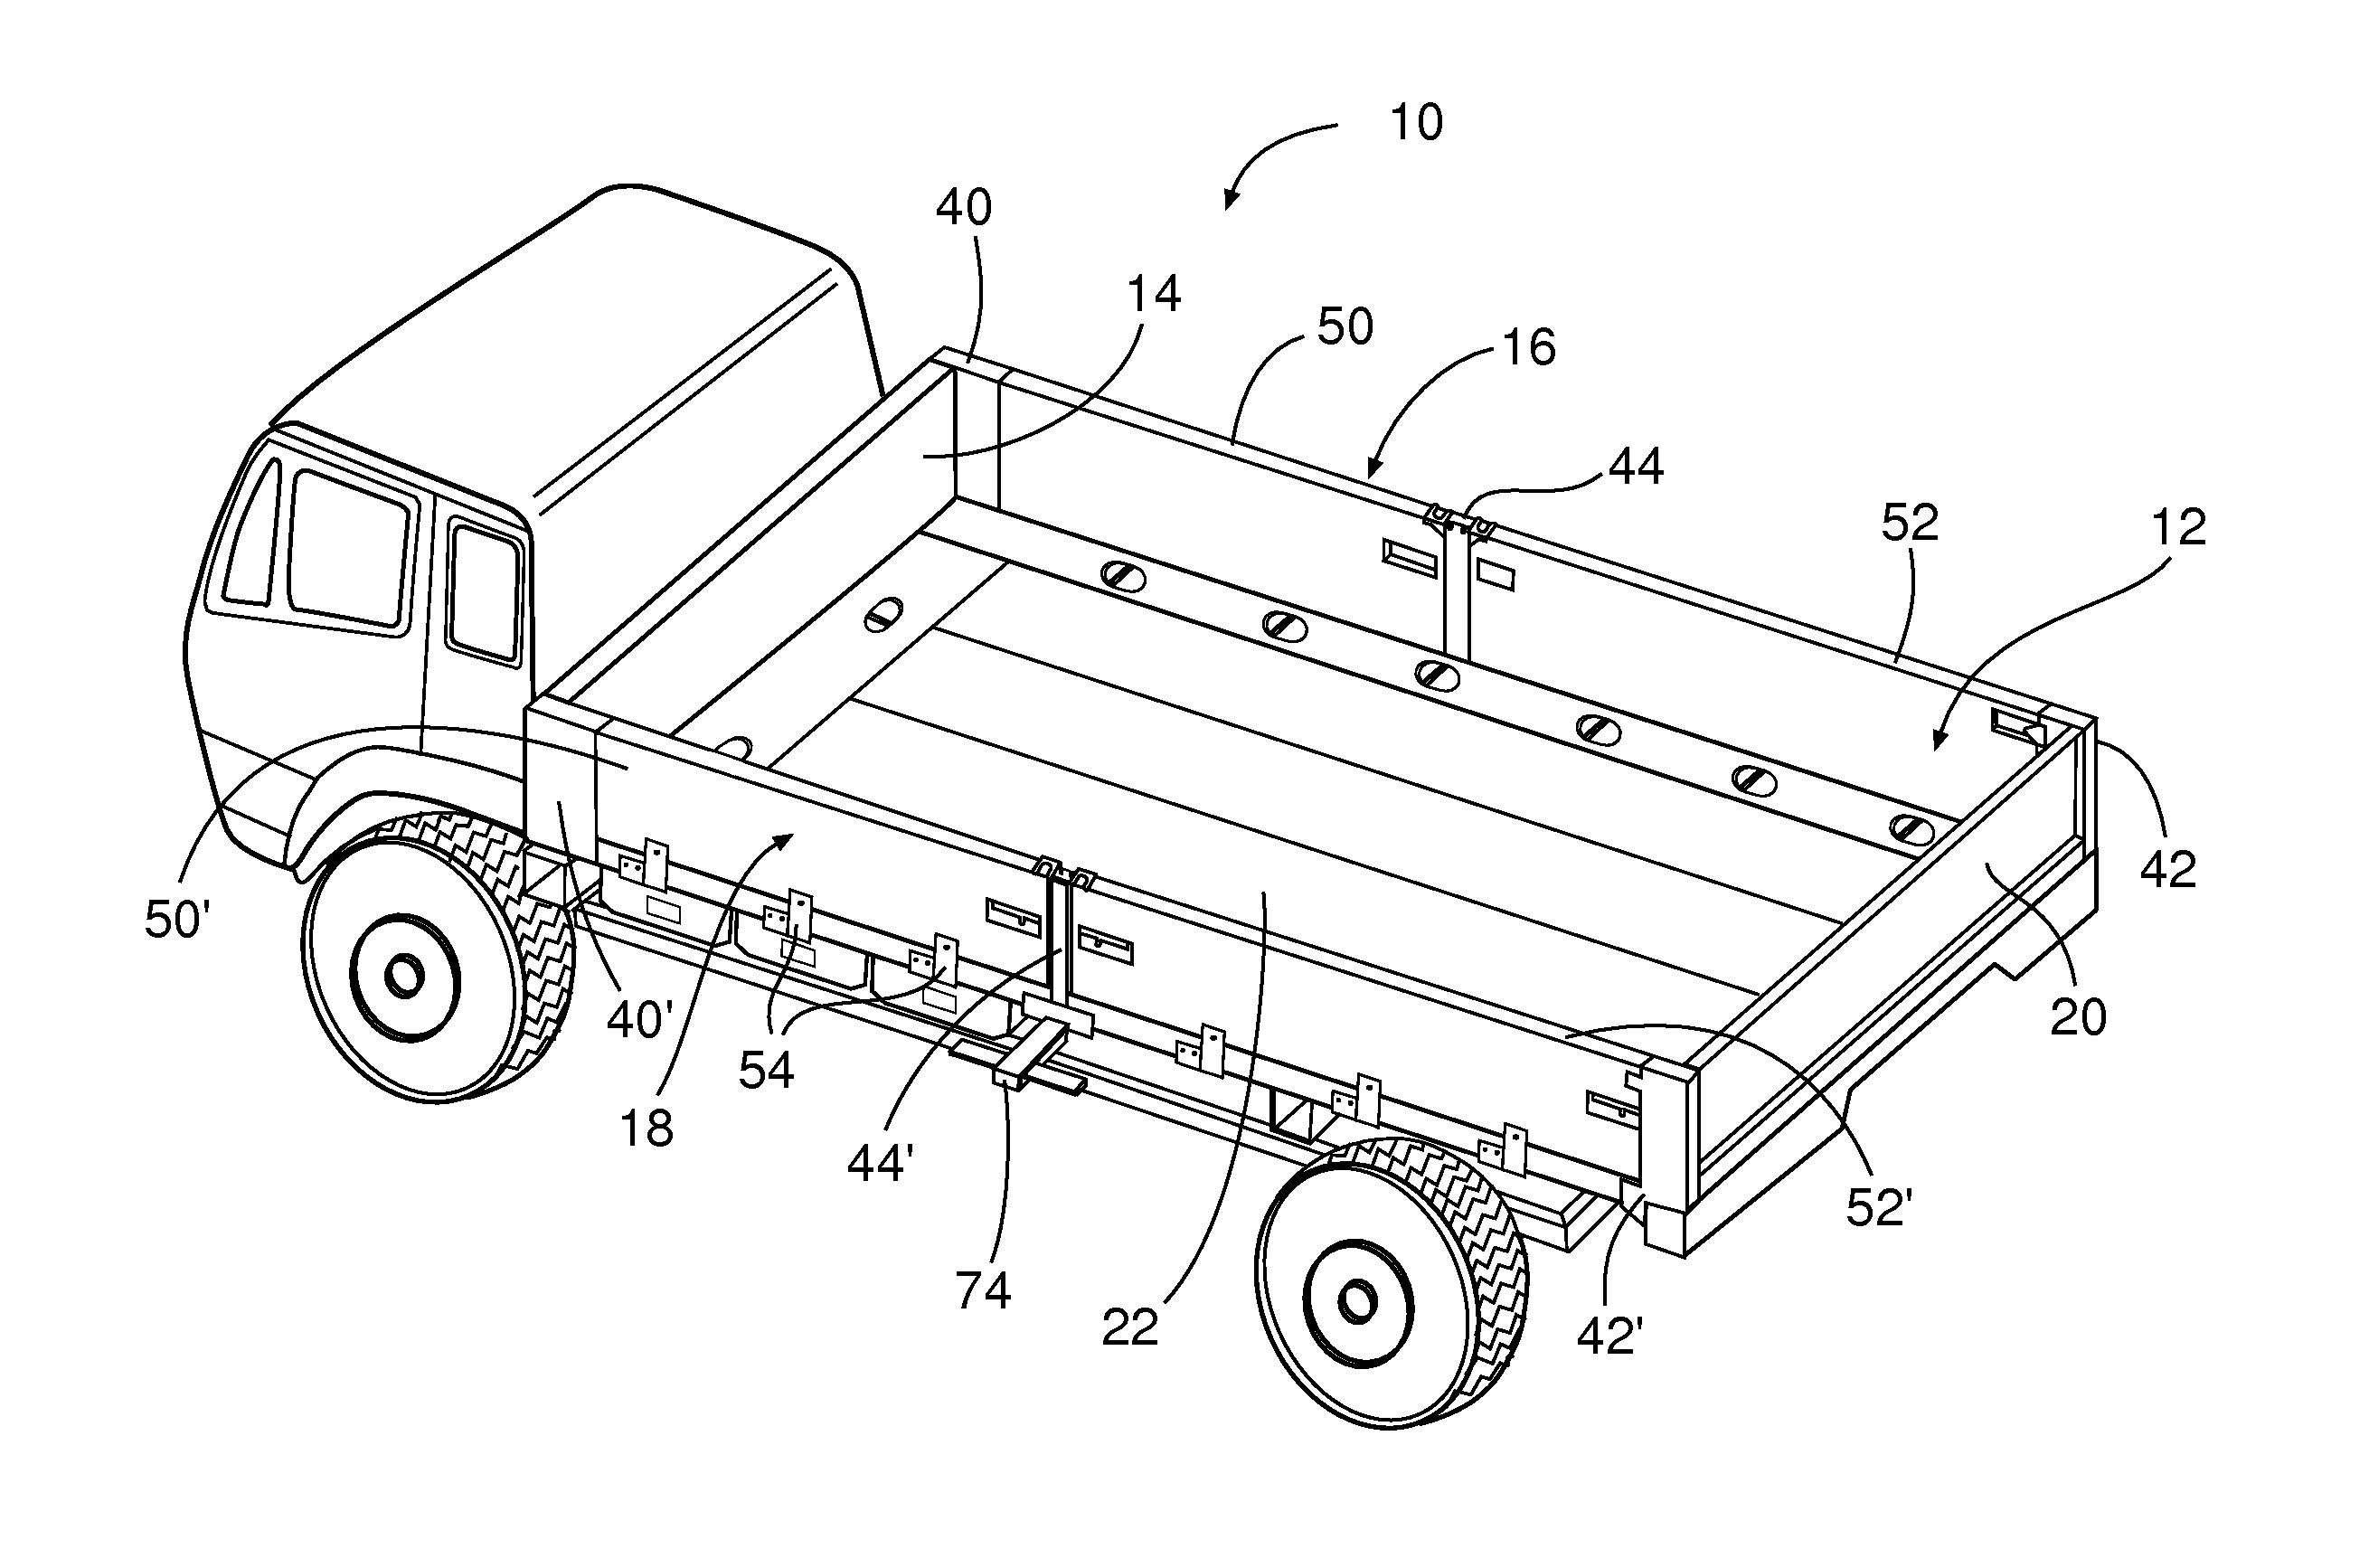 Cargo bed structure comprising fiber reinforced polymer components